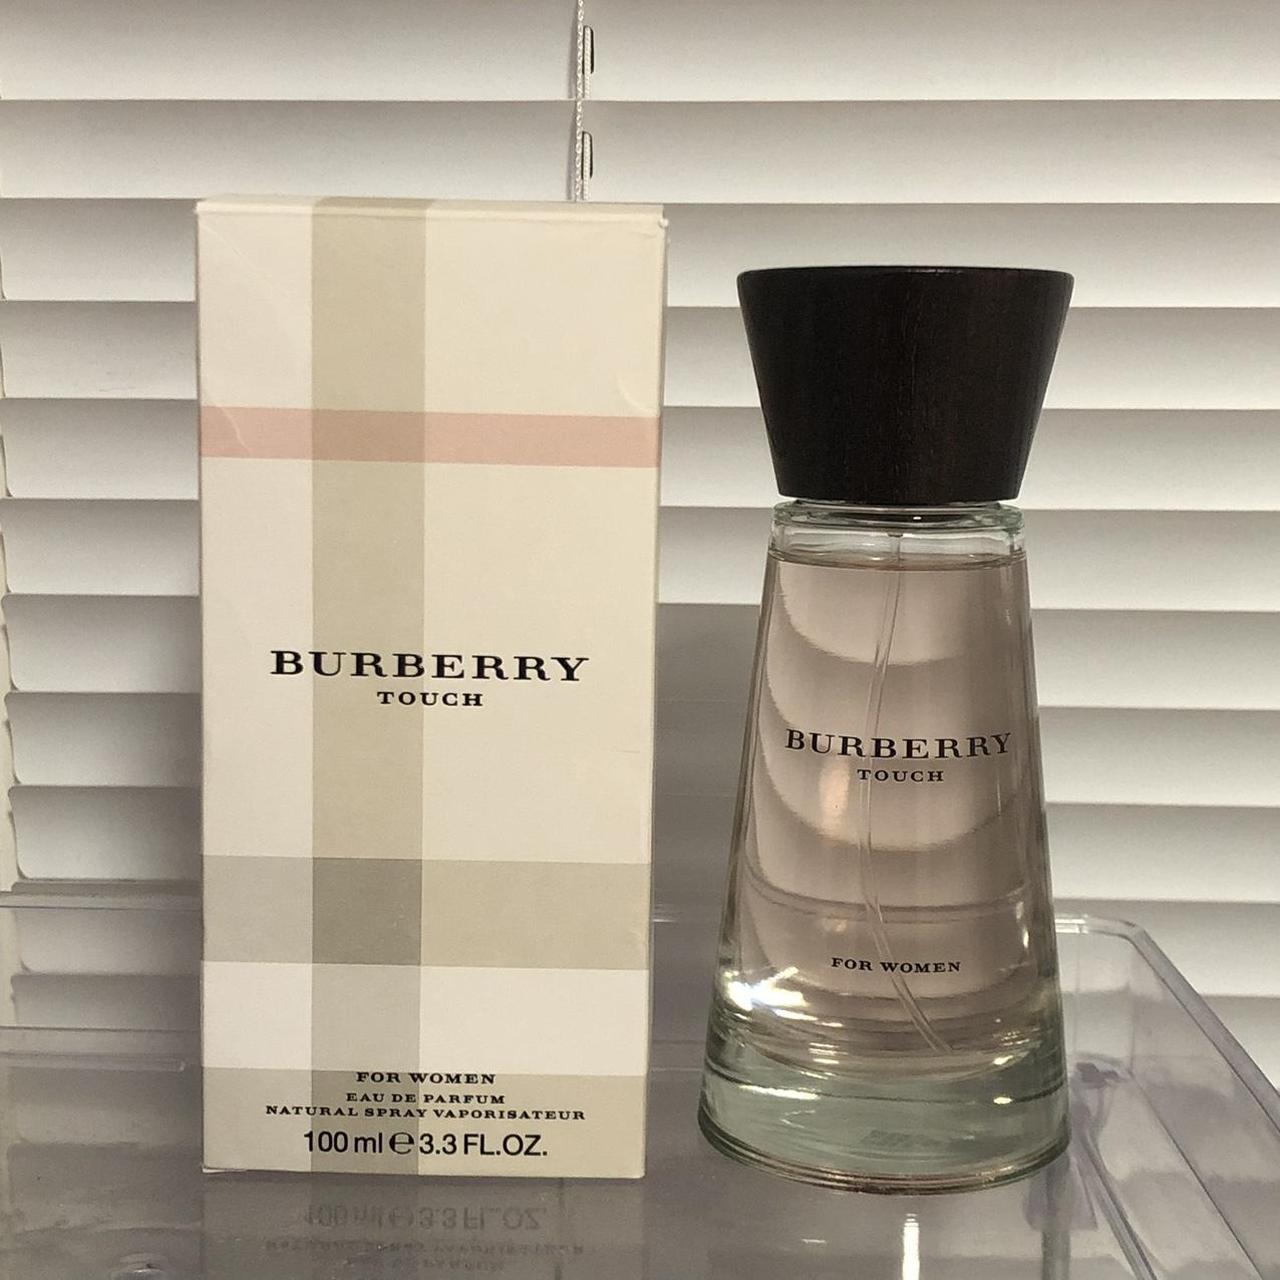 DM Before Buying Burberry Touch • Depop for Women... EDP 